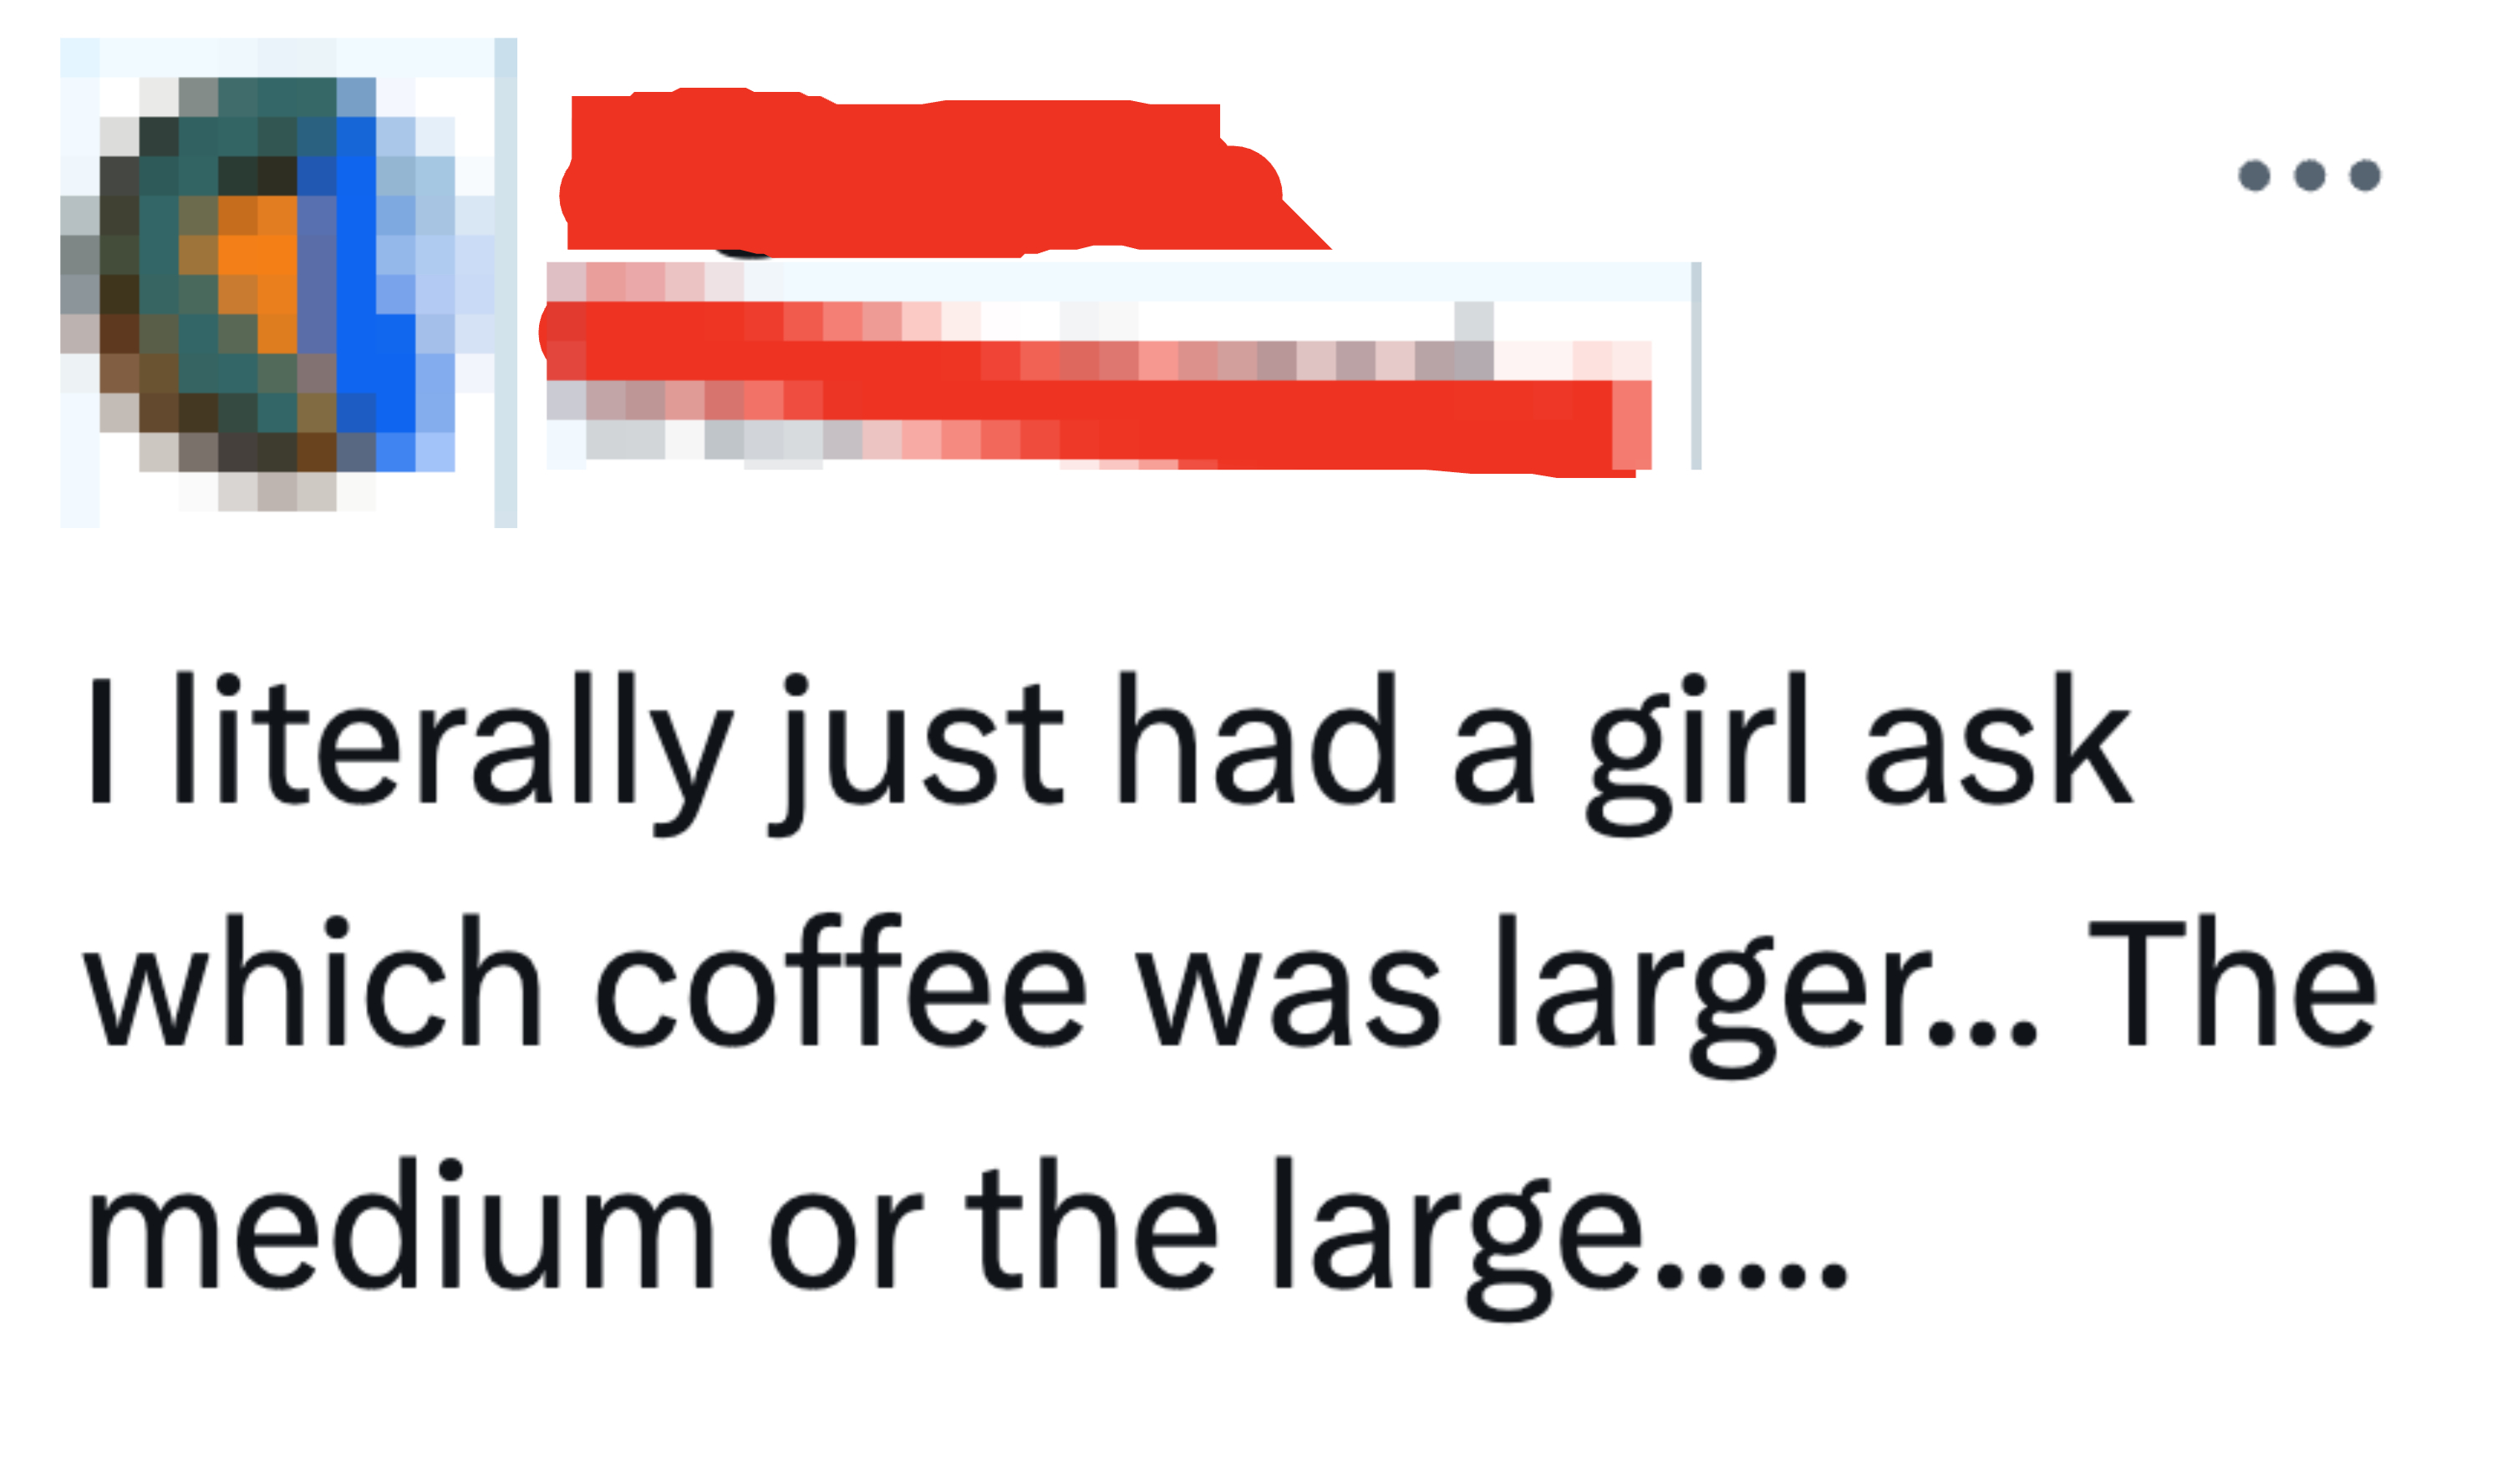 Tweet showing confusion over someone asking which coffee size is larger, medium or large